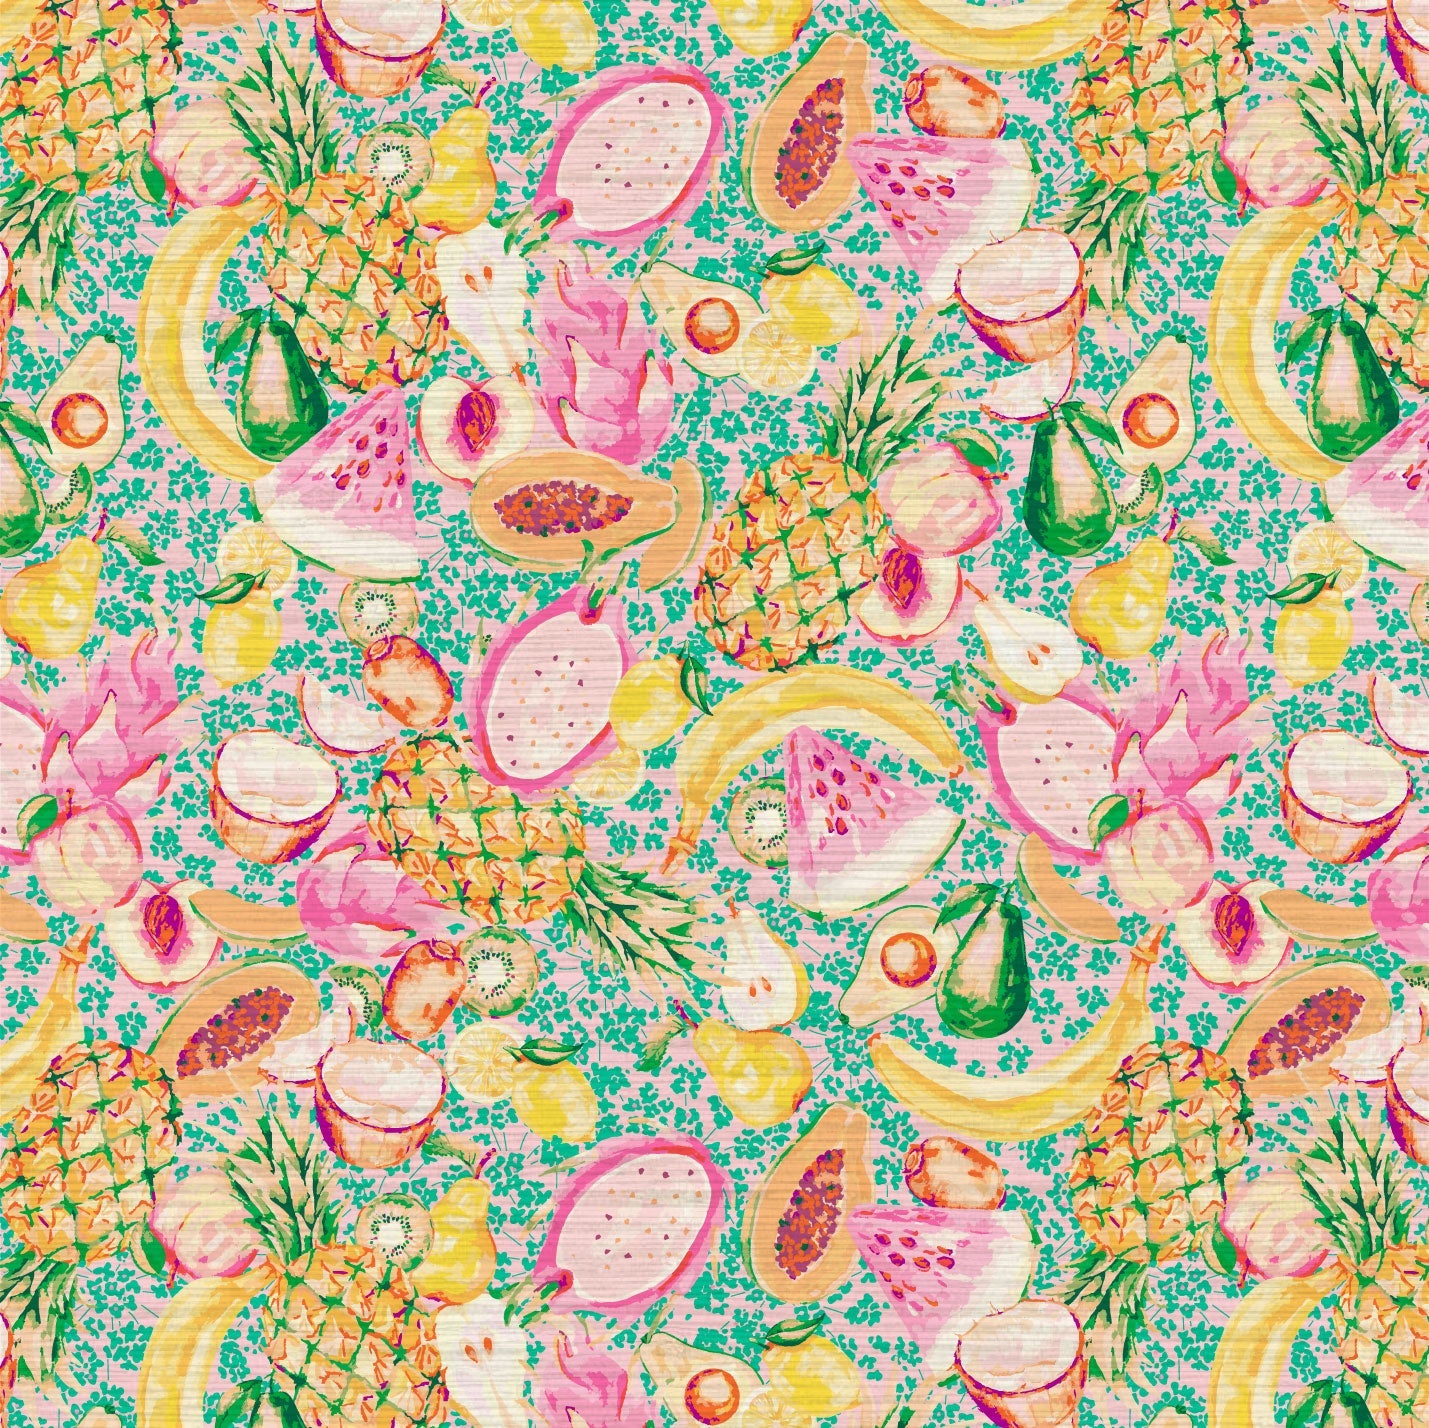 Load image into Gallery viewer, grasscloth wallpaper hand painted with pastel watercolors, pink based print with bright green ditsy florals with tossed fruit layered on top including: pineapples, limes, bananas, avocados, lemons, pears, peaches, watermelon, coconuts, mangos, bananas and passion fruit Natural Textured Eco-Friendly Non-toxic High-quality Sustainable practices Sustainability Interior Design Wall covering Bold tropical retro chic garden
